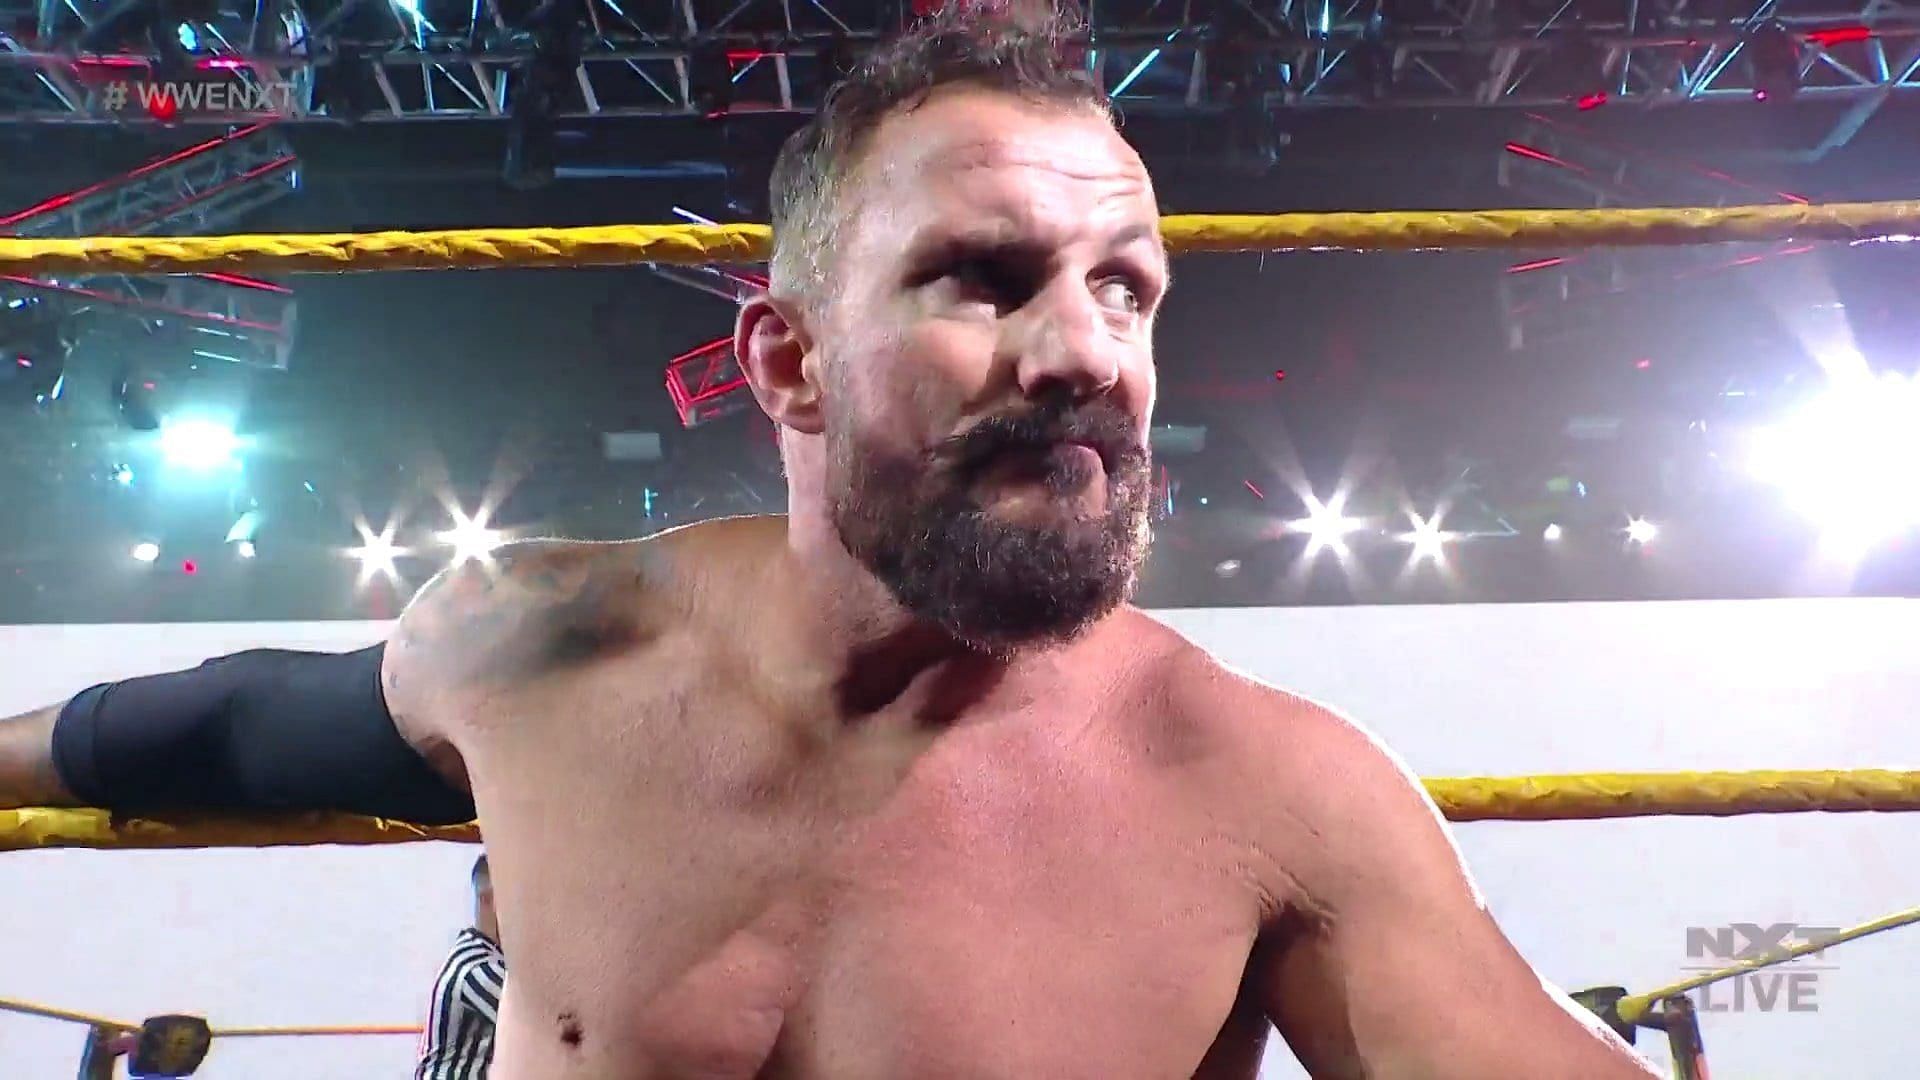 Bobby Fish, one of the best technical wrestlers today, could likely join The Elite.